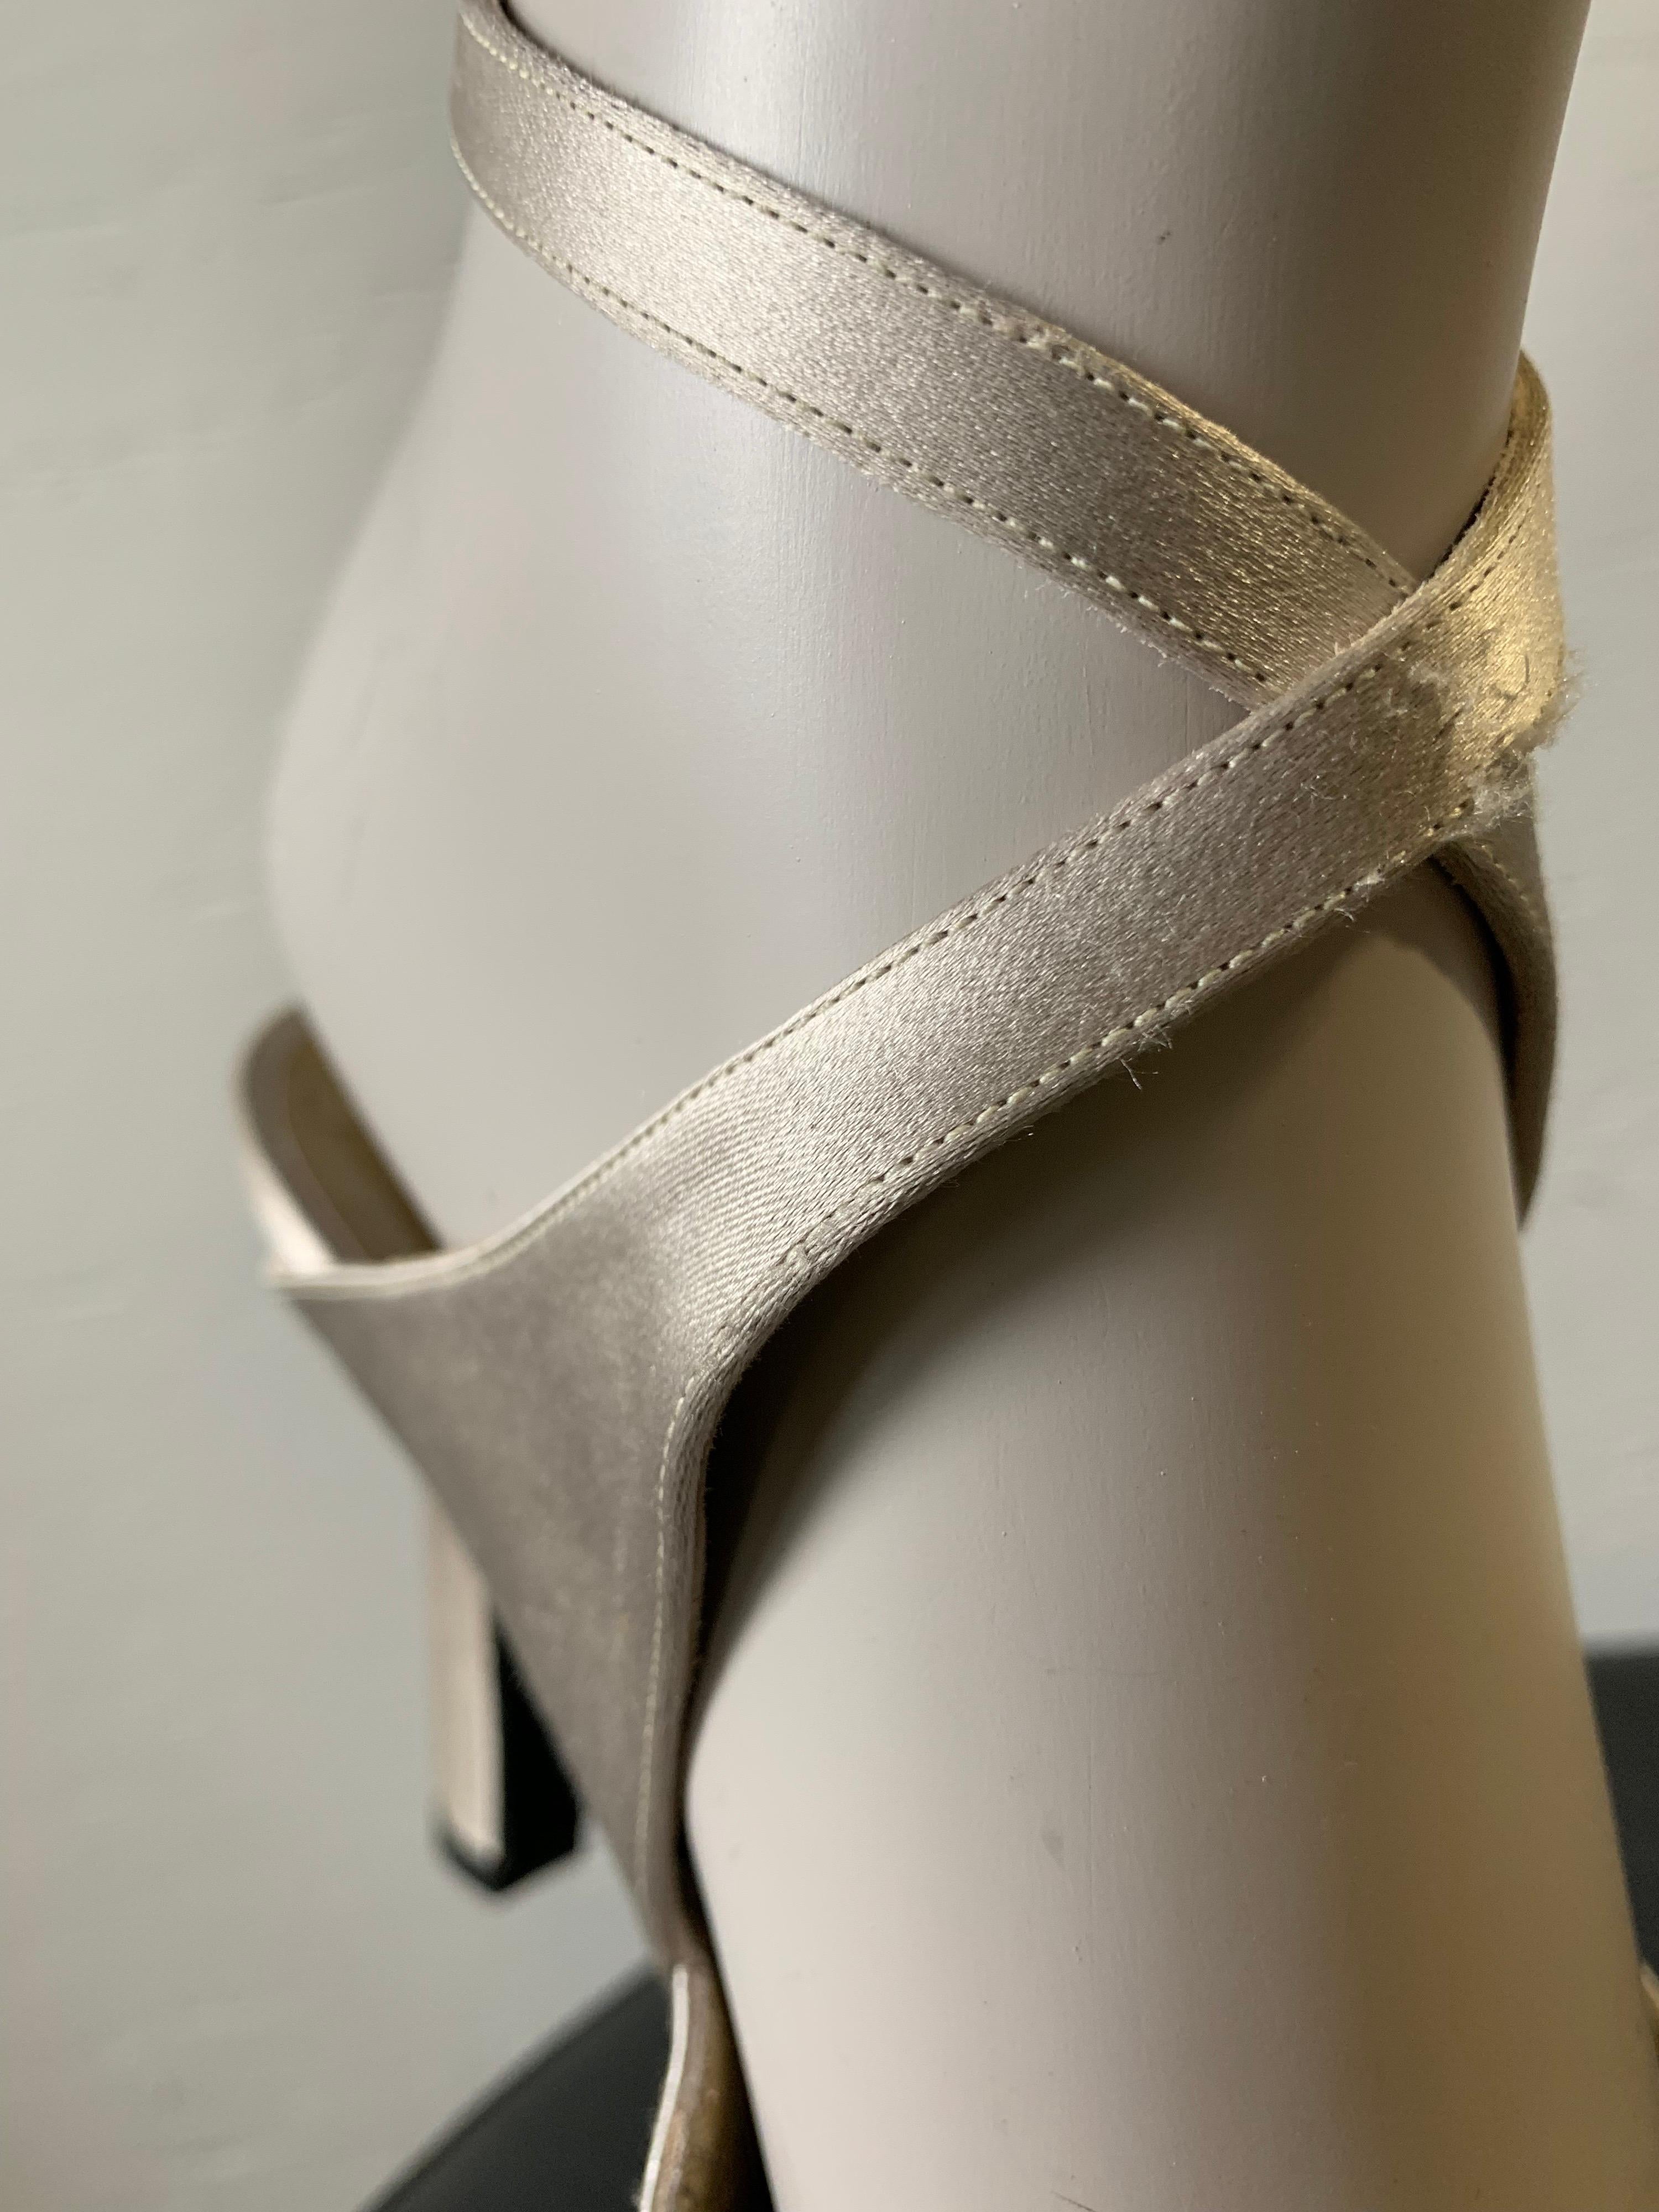 1980s Yves Saint Laurent Silver Satin Ankle-Cross Stillettos W/ Pointed Toe In Excellent Condition For Sale In Gresham, OR